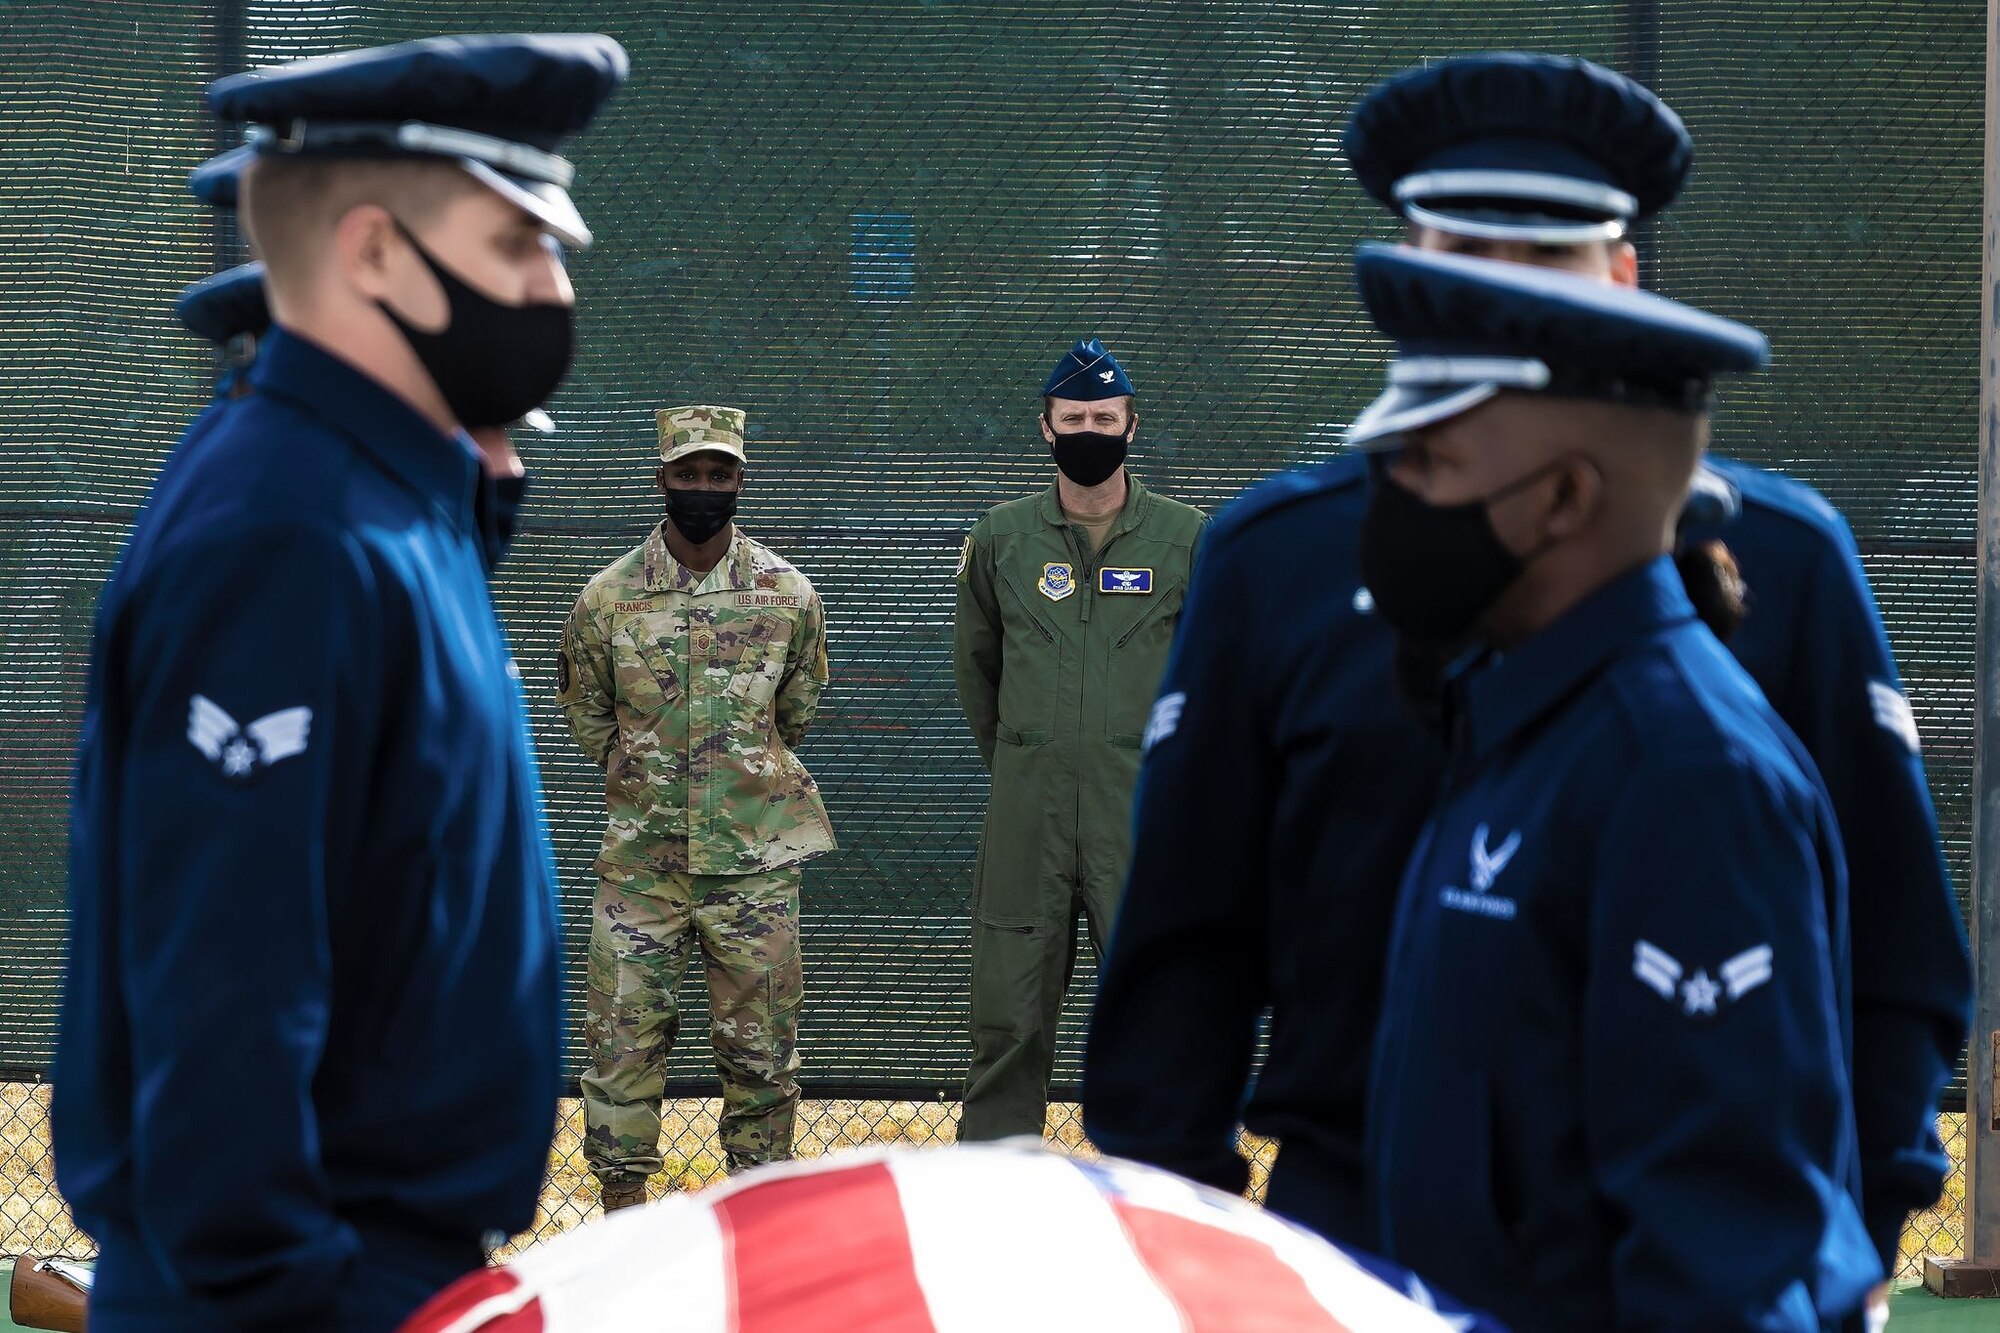 Airmen in Guardsmen attire line along a training casket while two men in military uniforms look on from the background